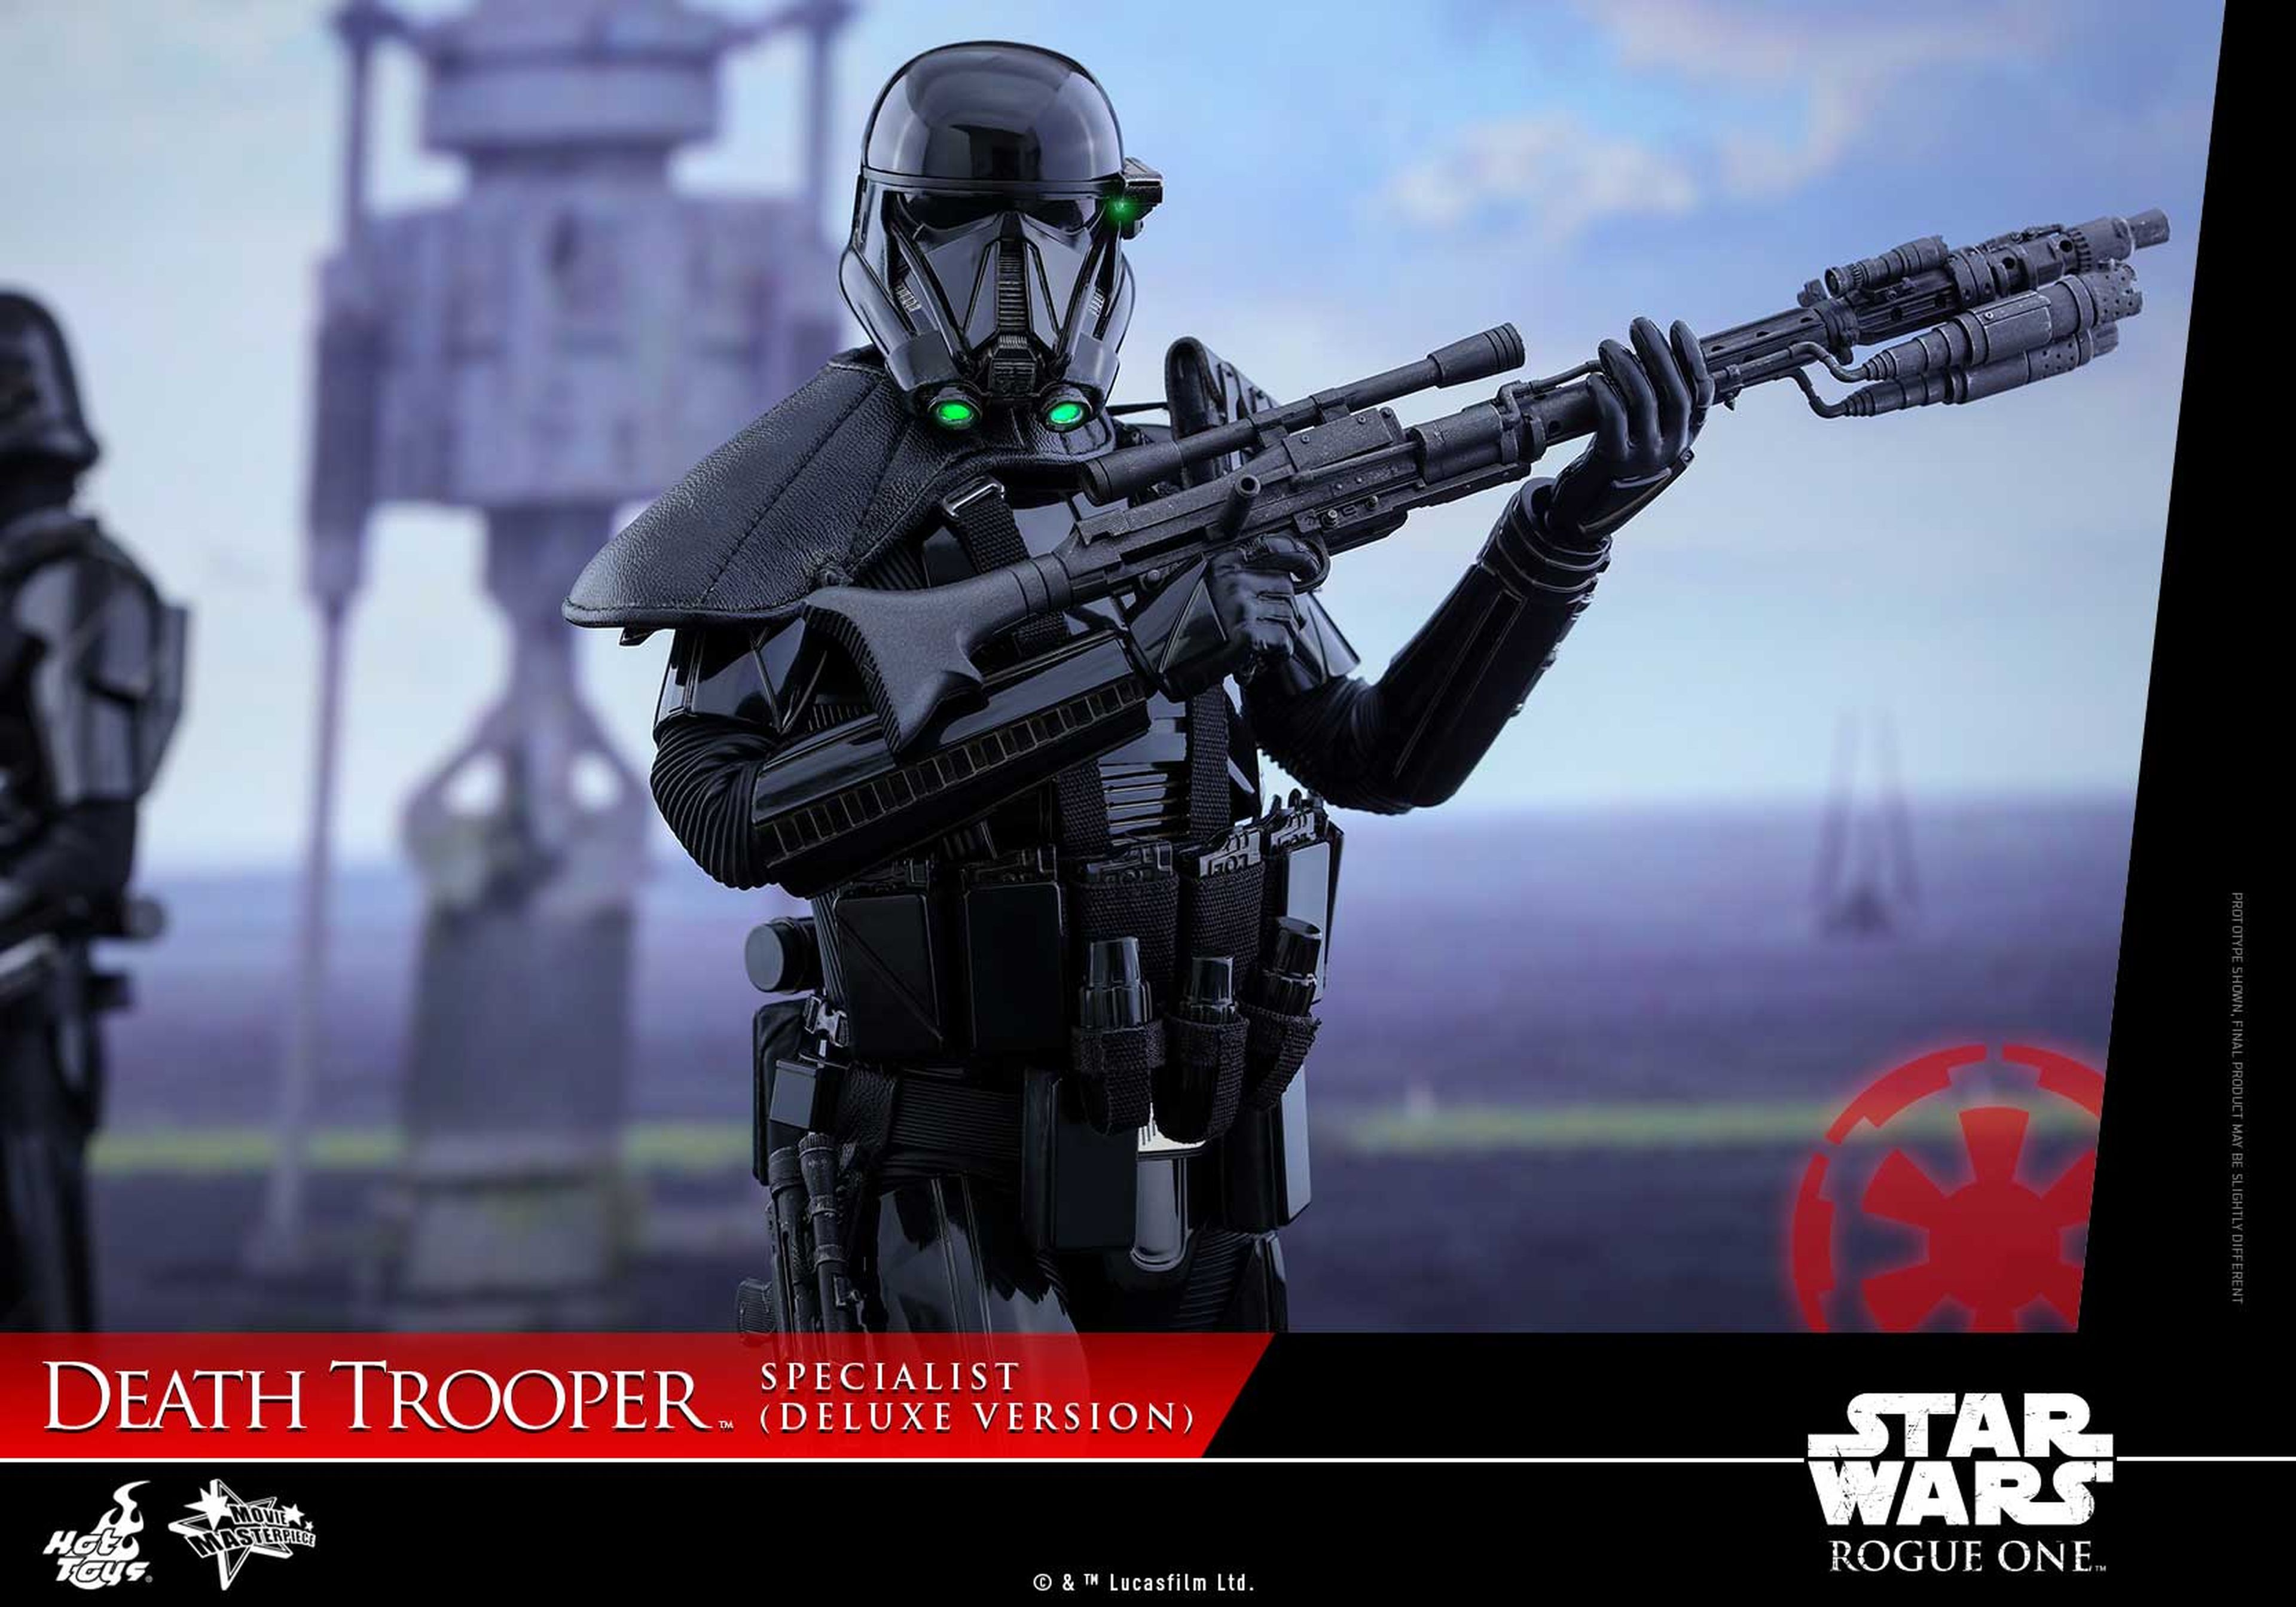 Star Wars Rogue One. Death Trooper Specialist. Hot Toys